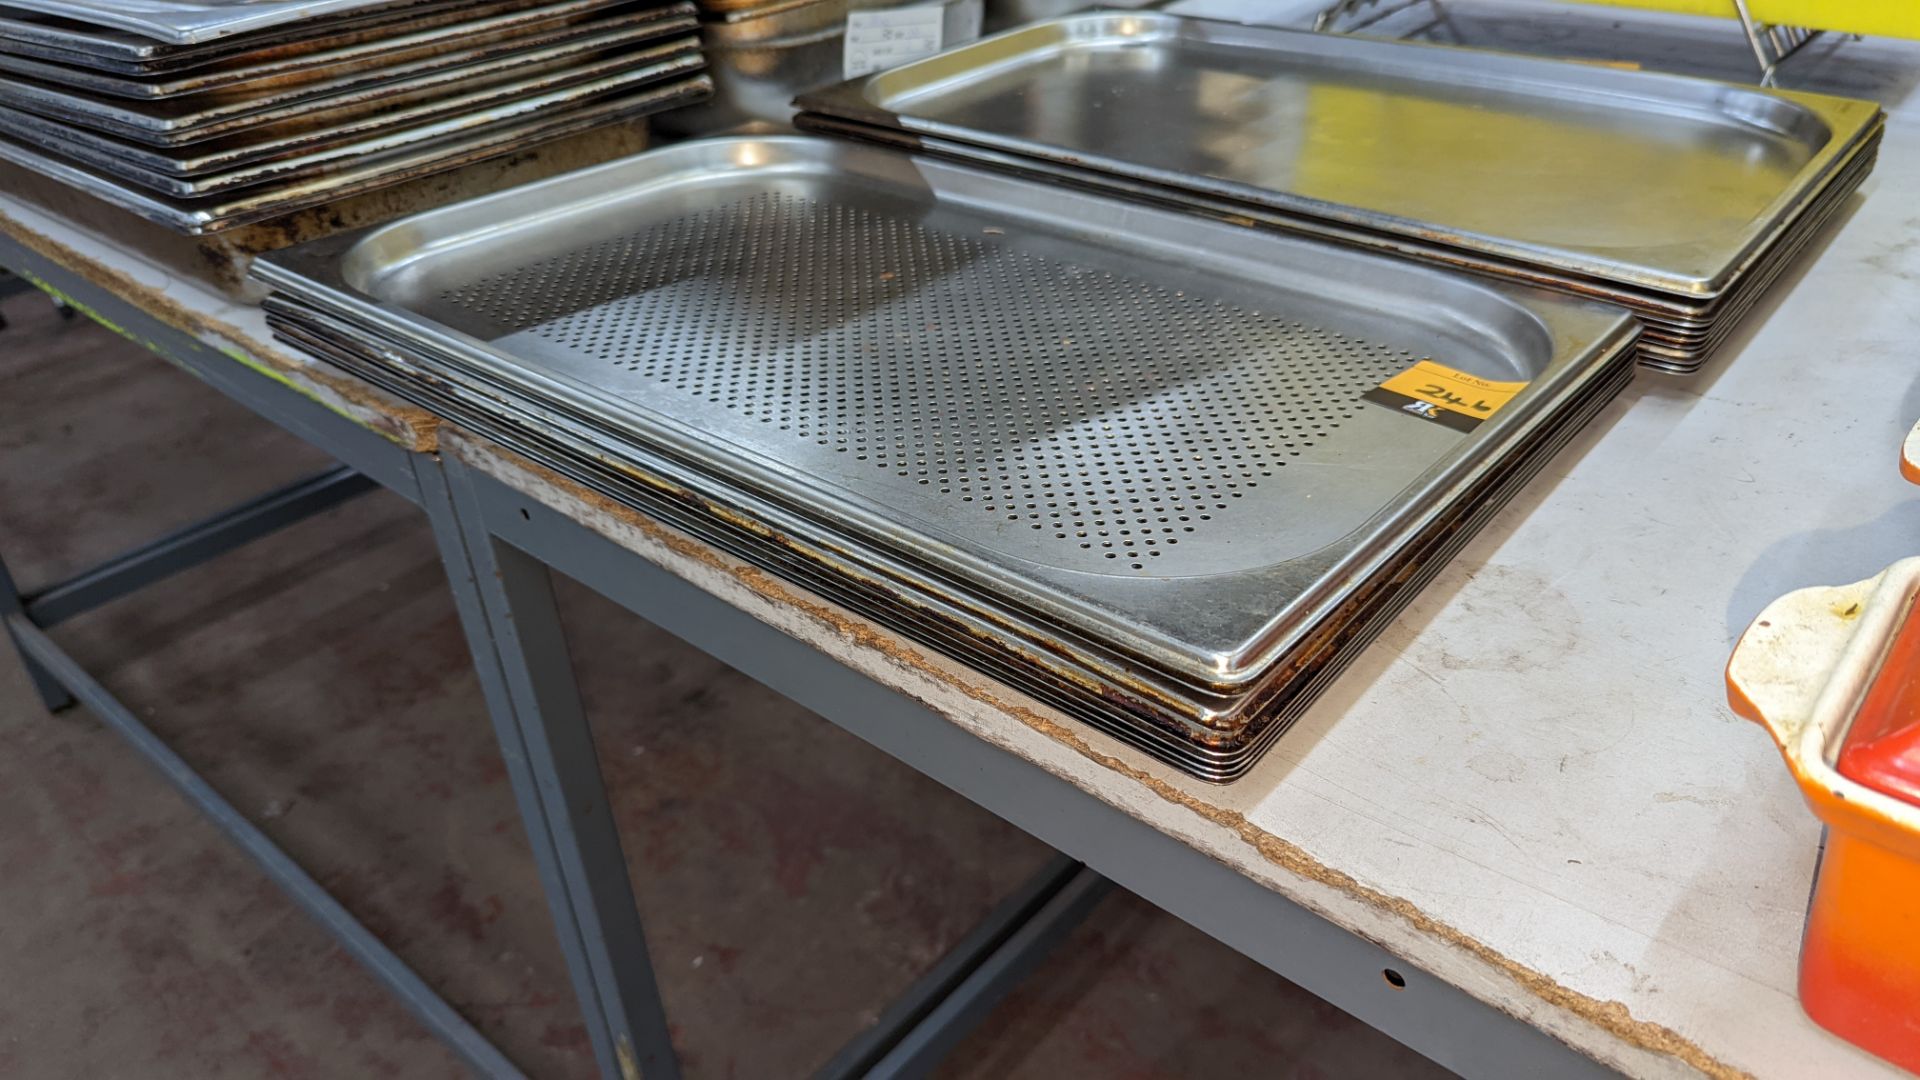 2 stacks of stainless steel rectangular trays including one perforated tray - Image 3 of 4